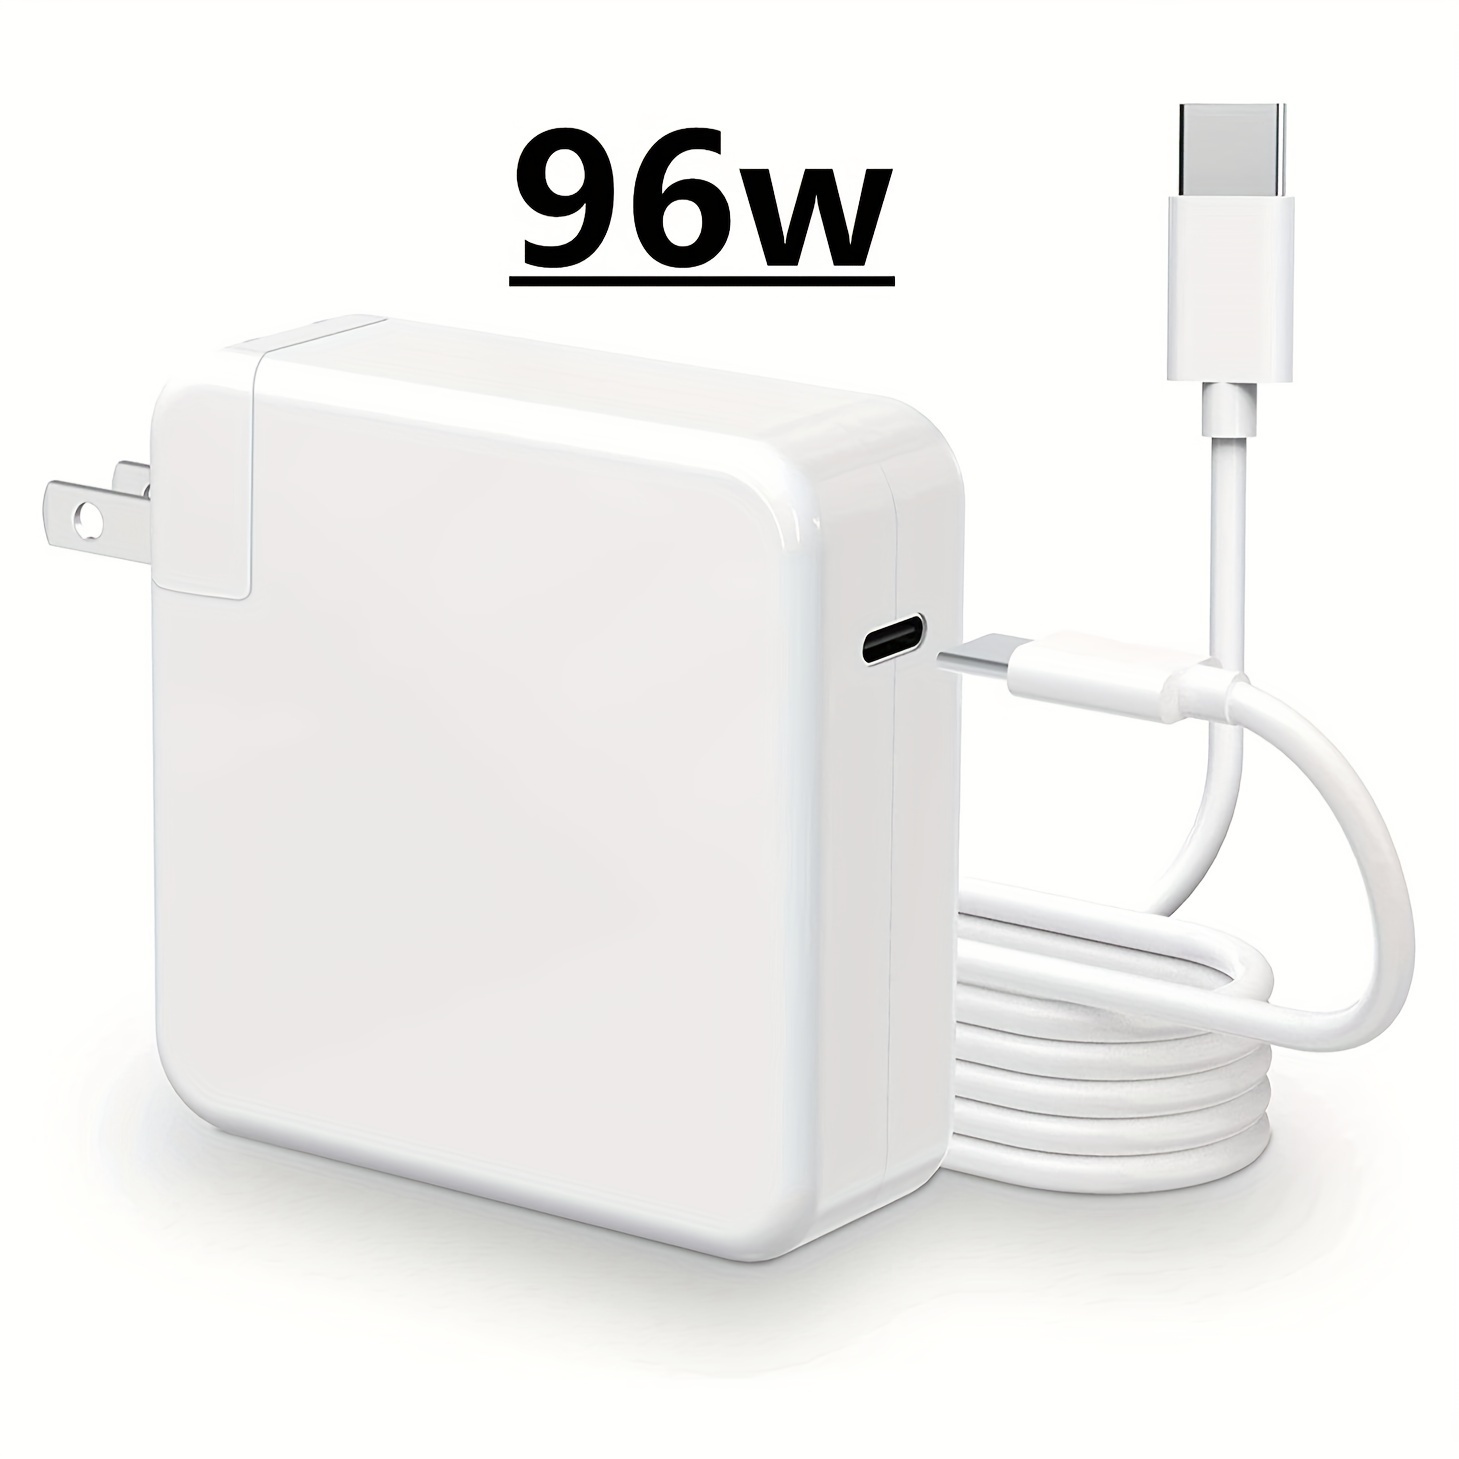 Mac Book Pro Charger - 118W USB C Charger Fast Charger Compatible with  MacBook Pro/Air, iPad Pro, Samsung Galaxy, and More USB-C Devices(7.2 ft  Cable